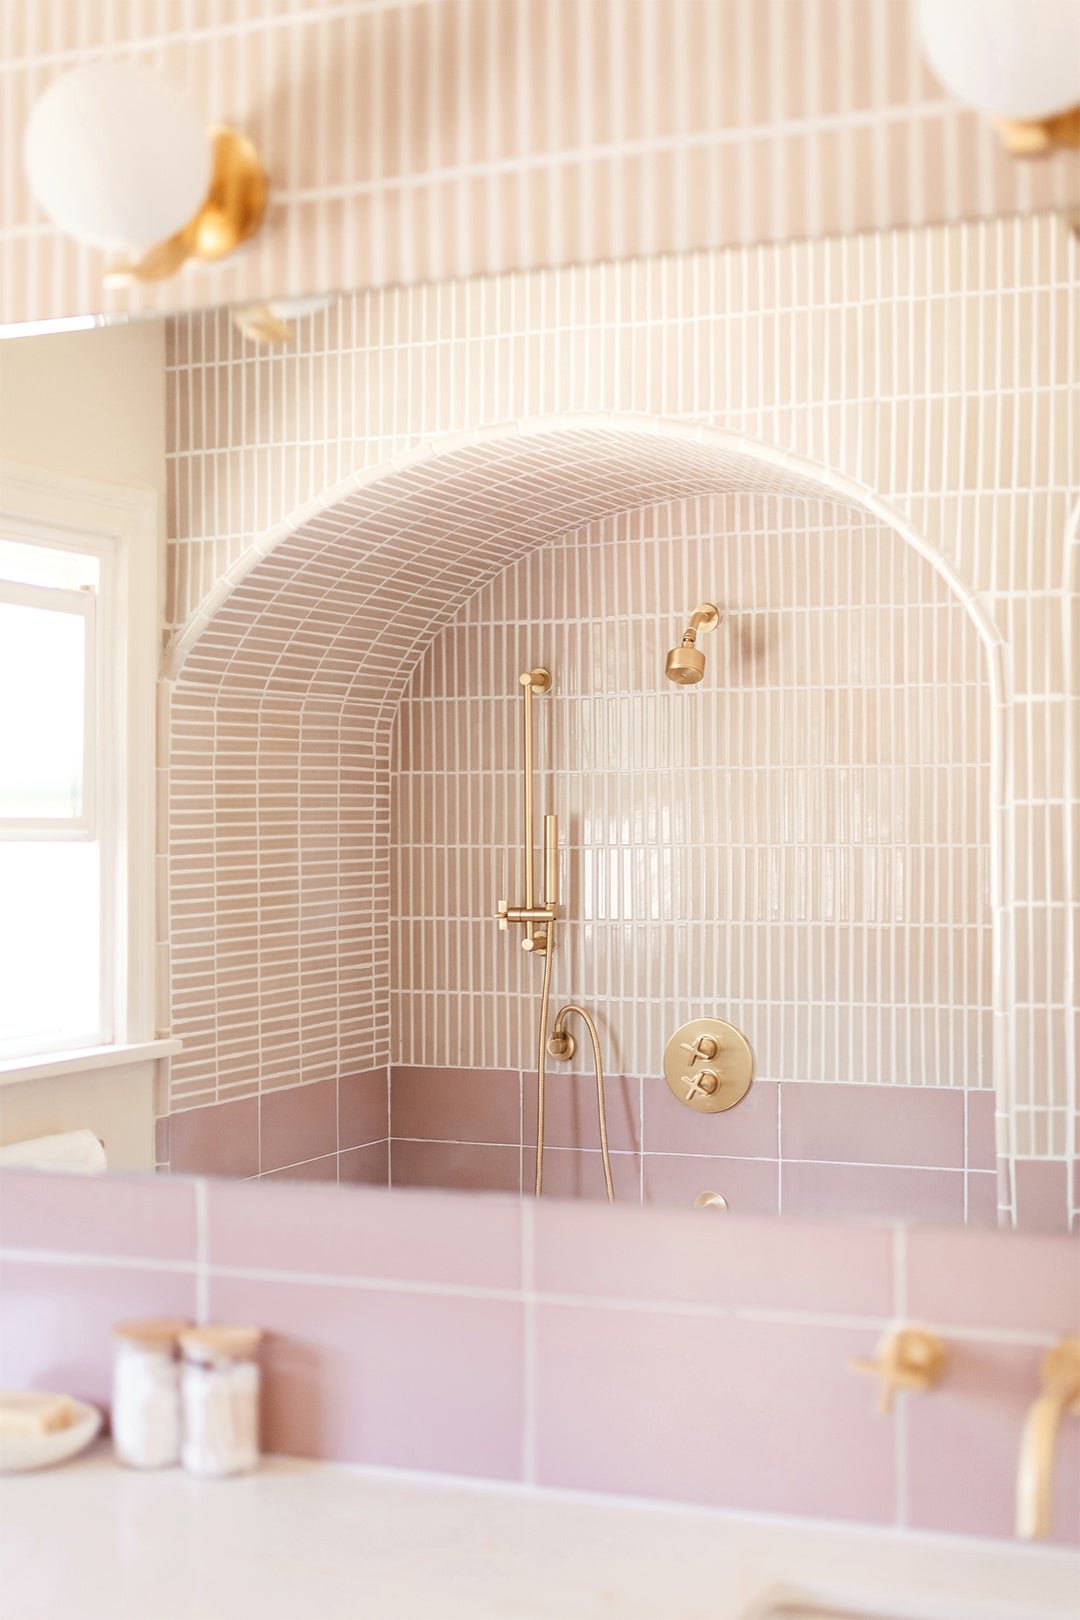 The Addition That Made This Bathroom’s 1920s Archways Feel Right for 2021